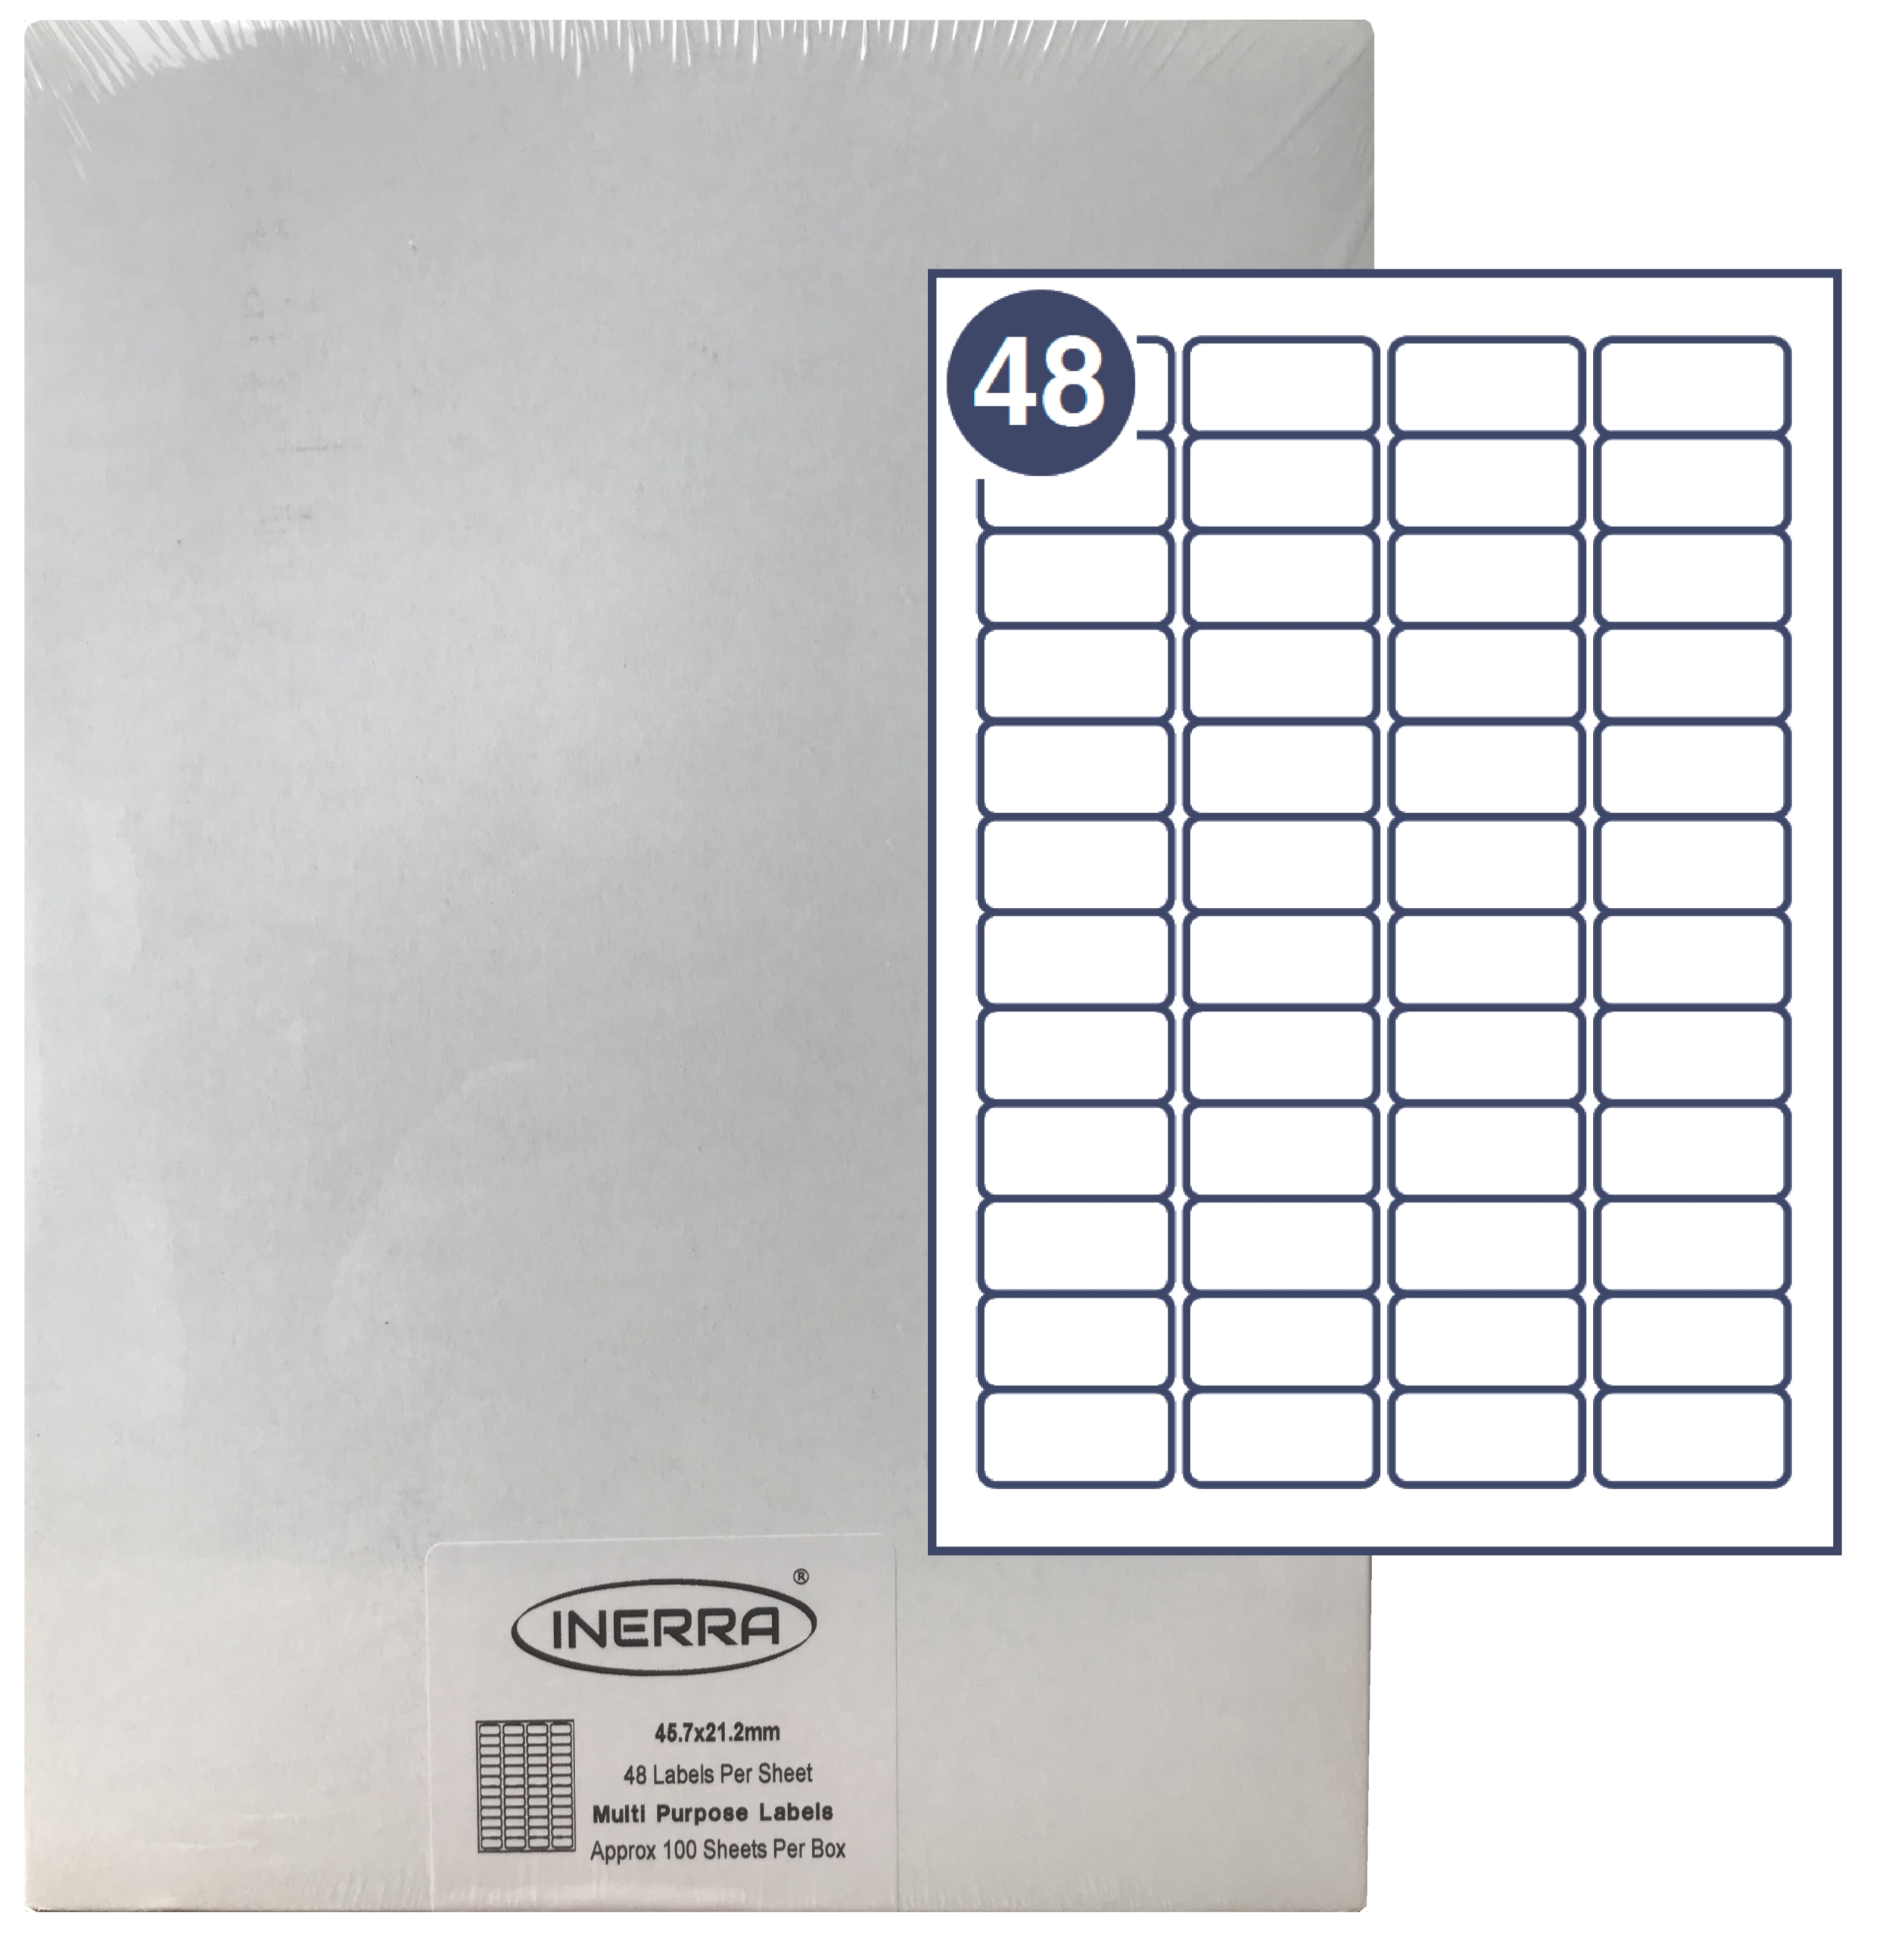 A4 Labels 21 Per Sheet Download Free / Free Template For Inerra Blank With Word Label Template 21 Per Sheet